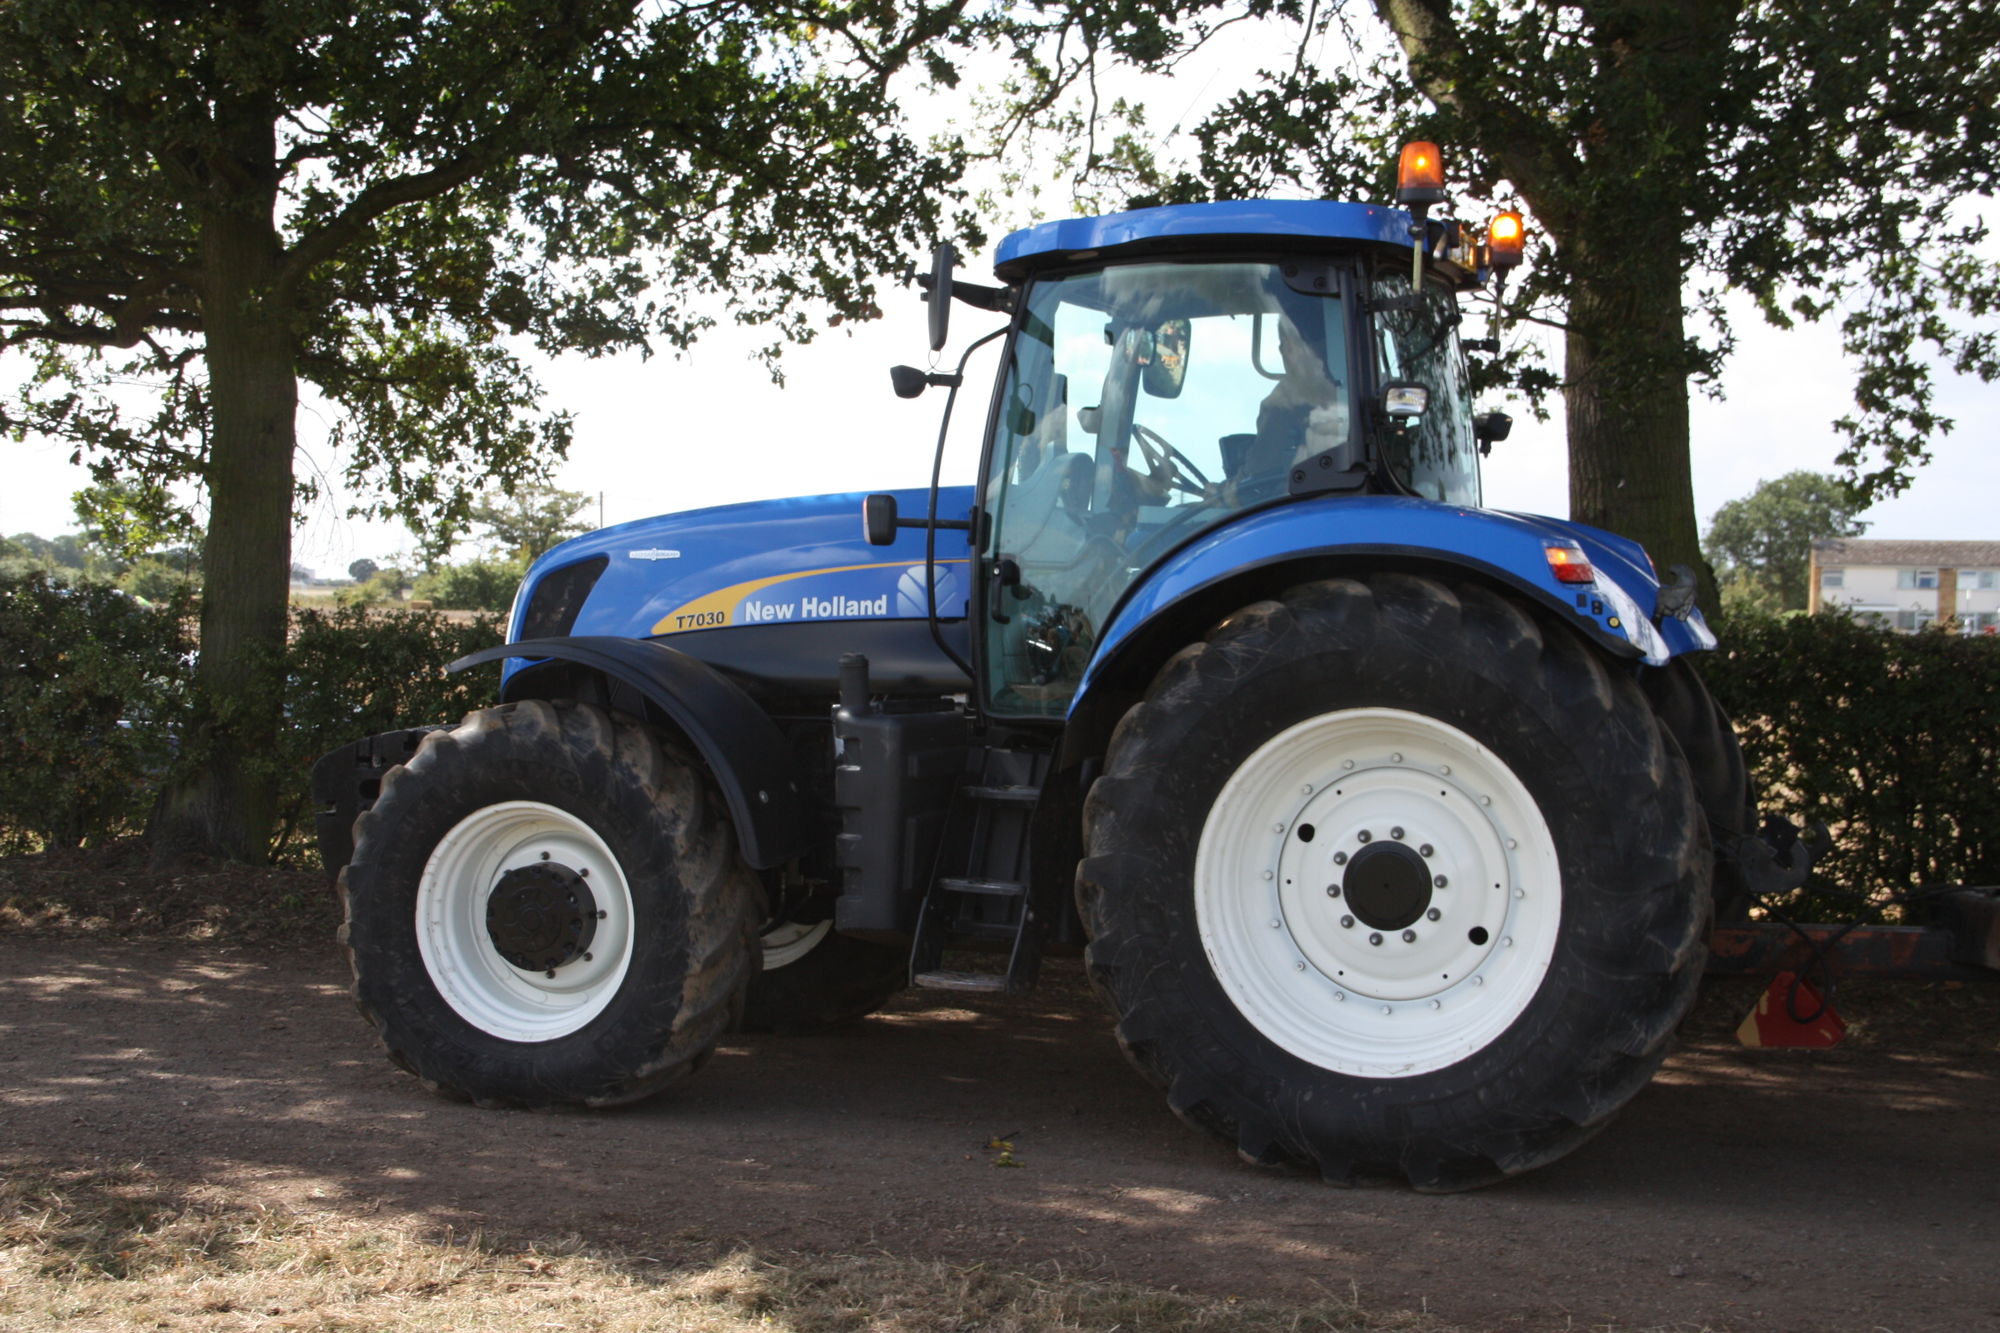 New Holland T7030 | Tractor & Construction Plant Wiki | Fandom powered ...